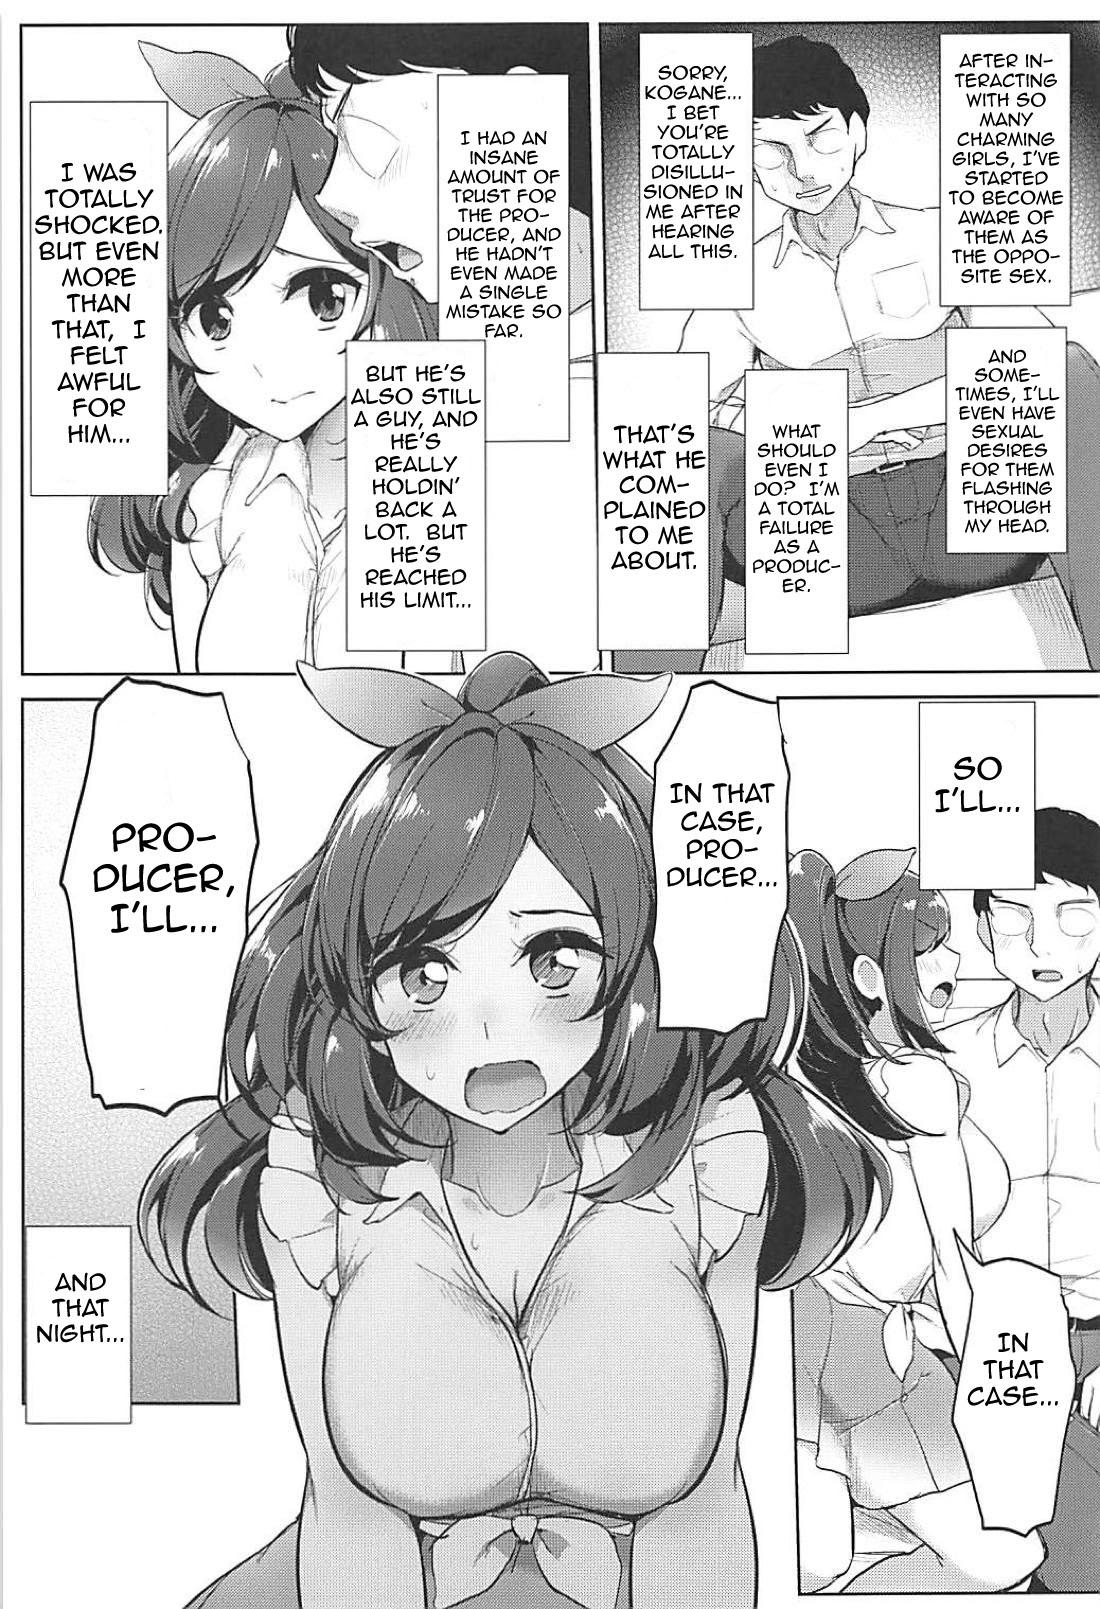 Groupfuck P e no Suki wa Tomeraren bai - When I Just Can't Stop Loving The Producer - The idolmaster One - Page 6